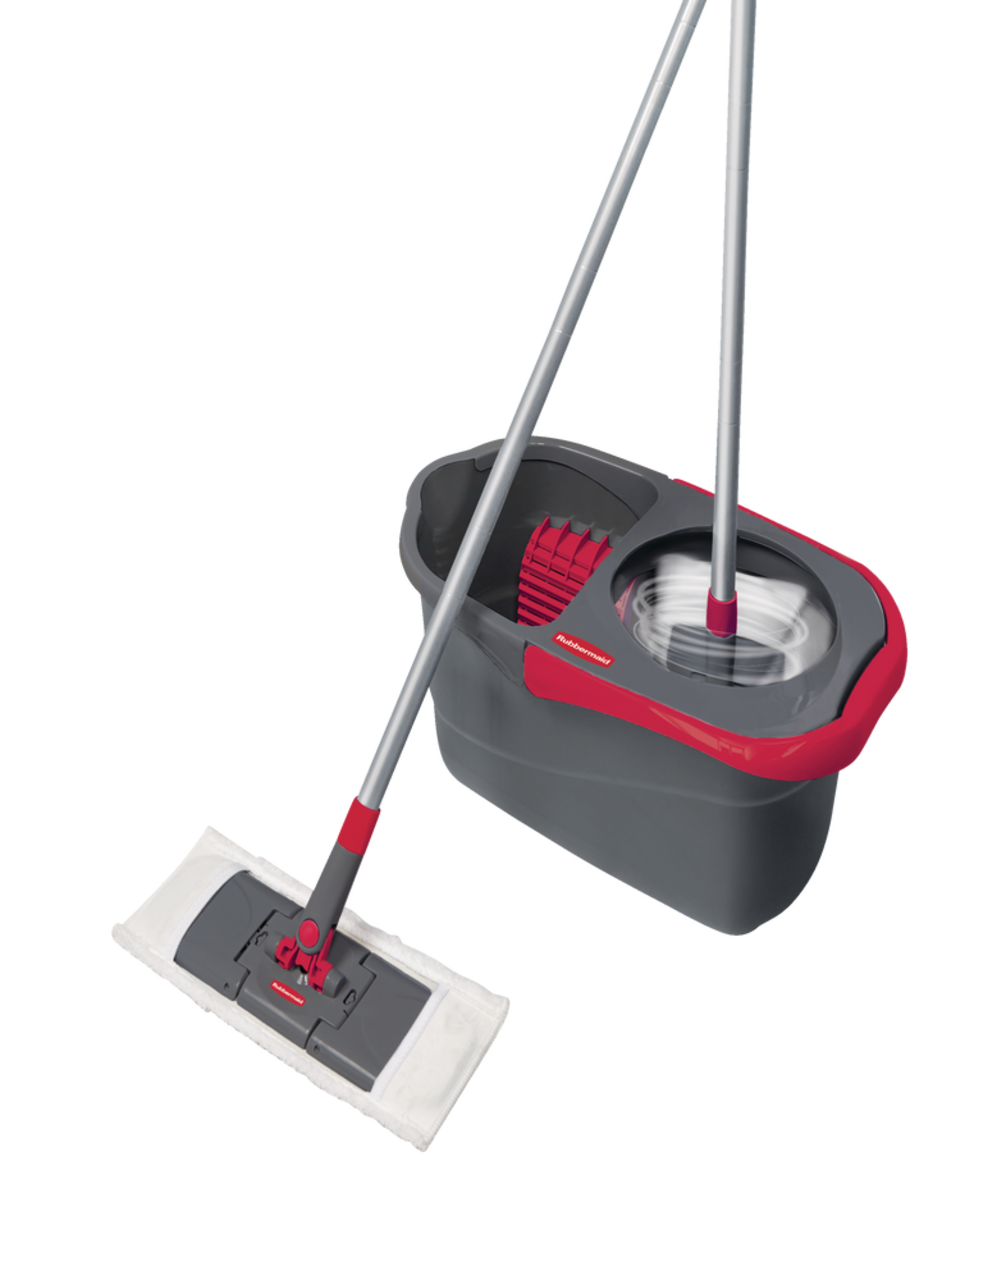 https://media-www.canadiantire.ca/product/living/cleaning/household-cleaning-tools/1425875/rubbermaid-flat-spin-mop-system-0bf48578-bb0d-4e66-8e66-e4efaefab040.png?imdensity=1&imwidth=640&impolicy=mZoom